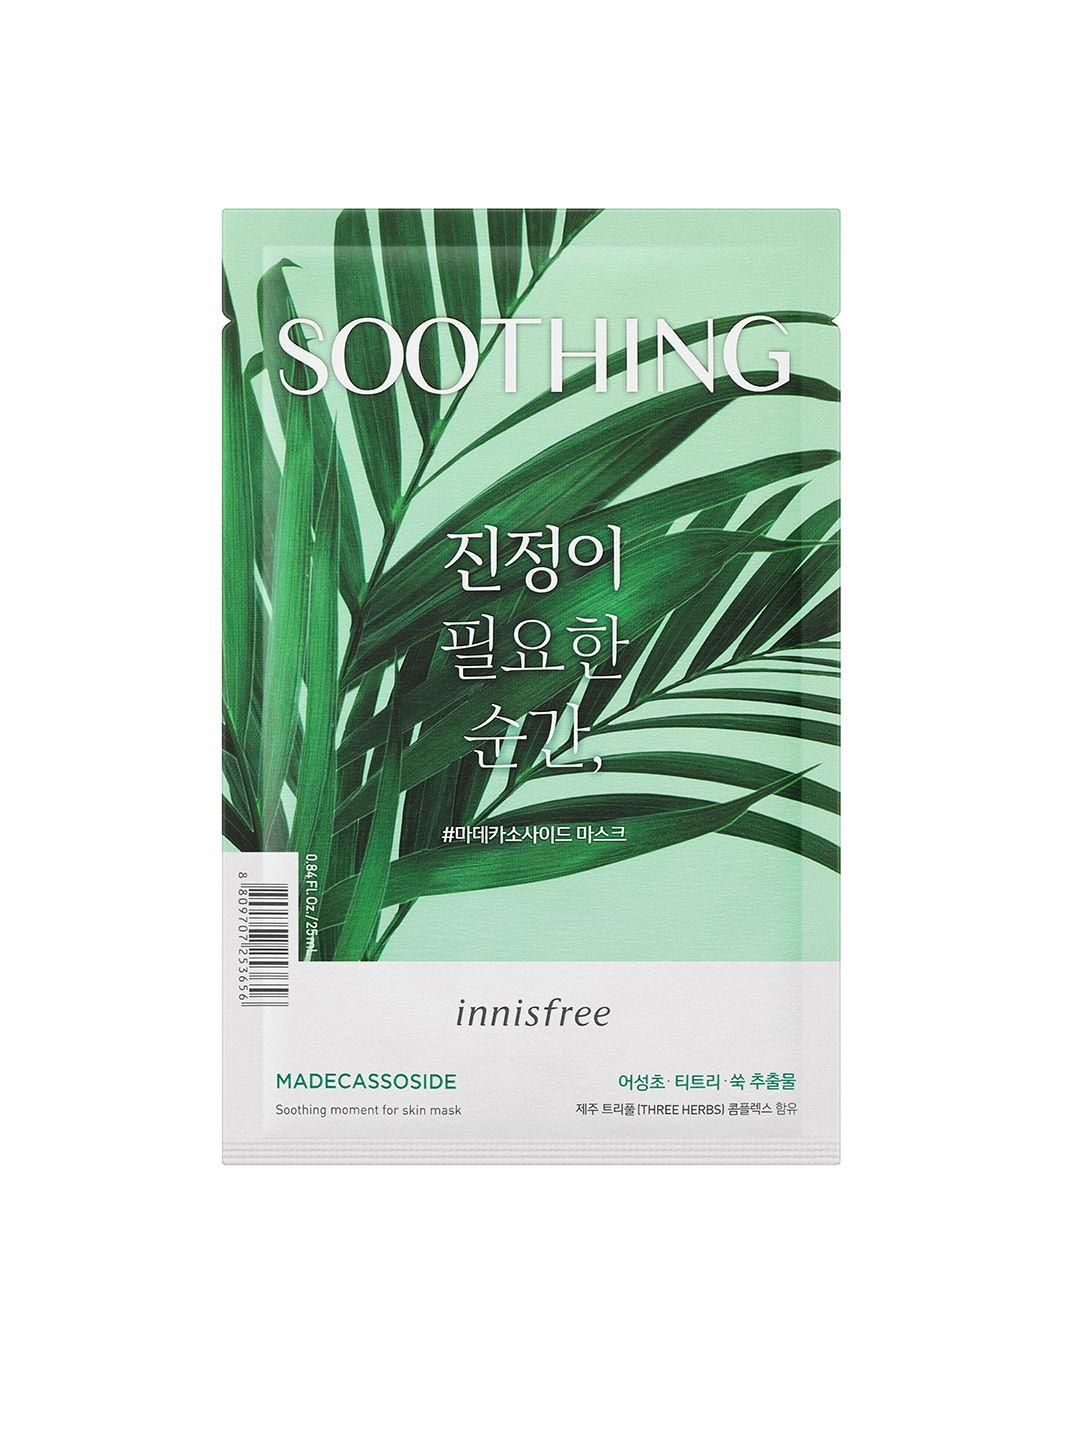 innisfree madecassoside soothing moment for skin mask